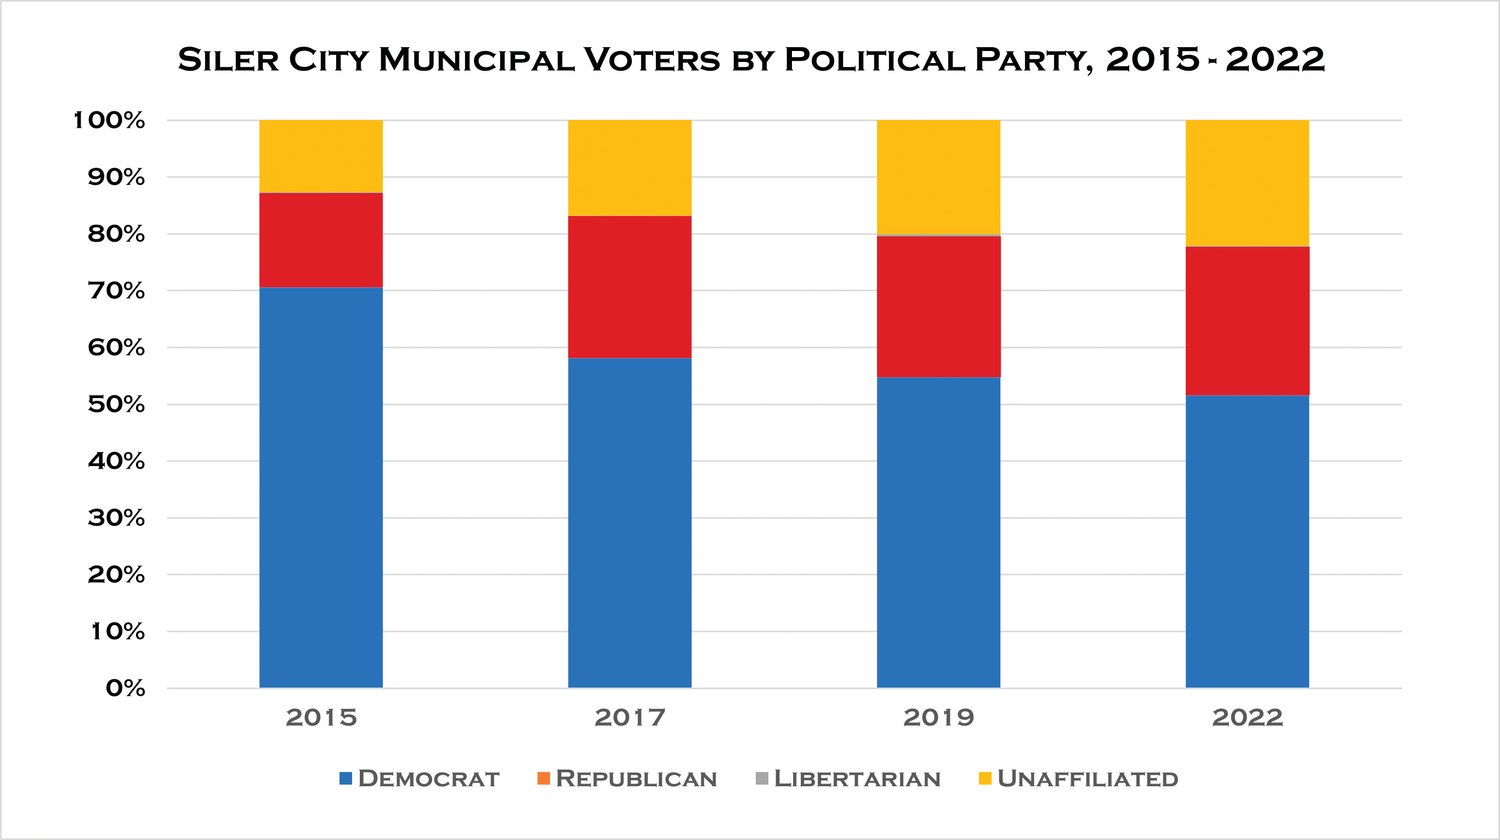 Much like in the 2015, 2017 and 2019 elections, most 2022 town voters were registered Democrats, but the percentage again decreased — accounting for 51.5%, down from 55% in 2019.